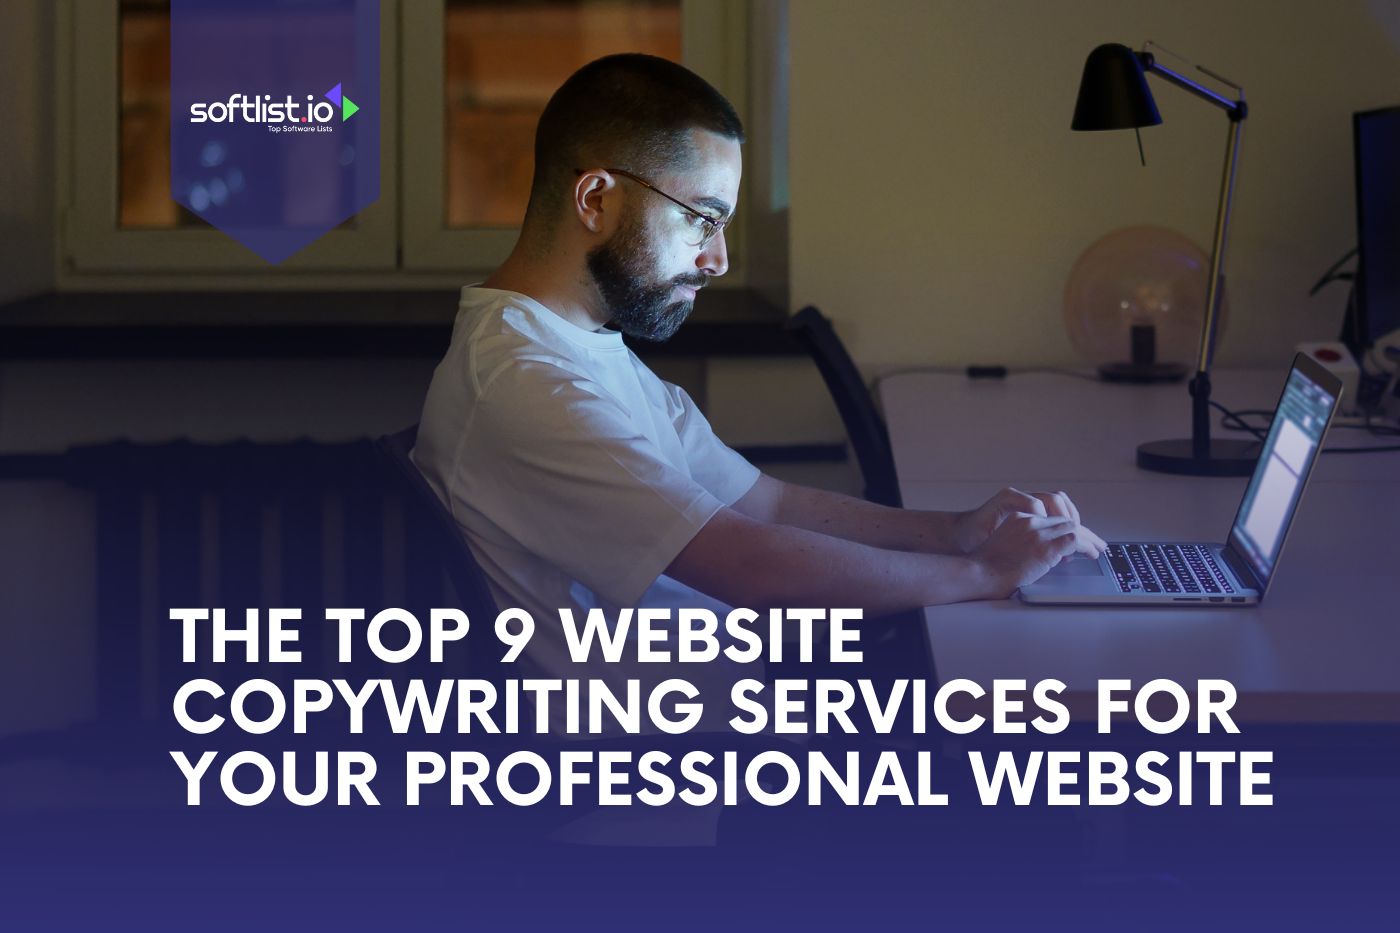 The Top 9 Website Copywriting Services for Your Professional Website